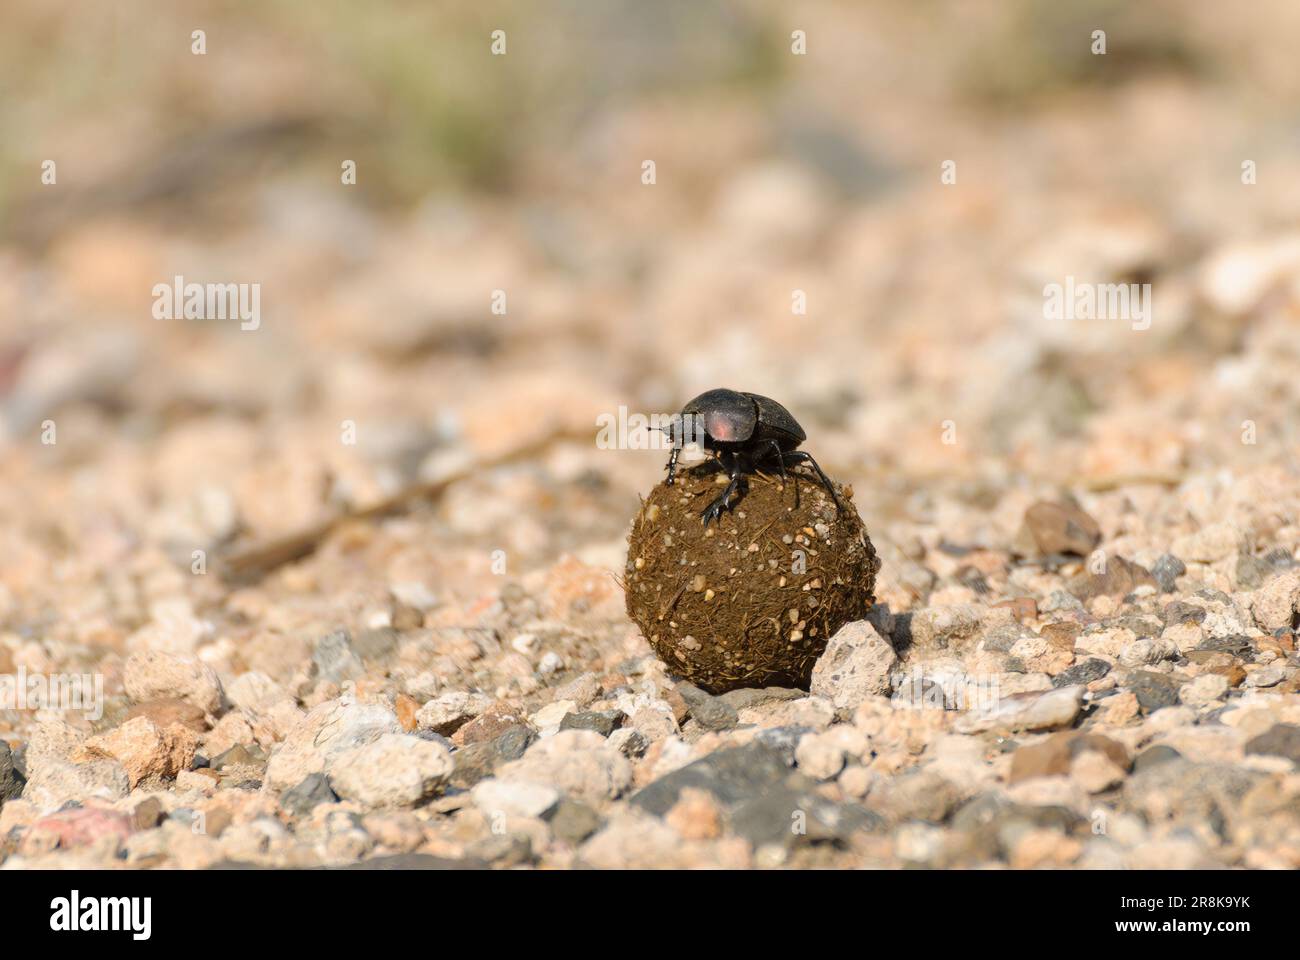 Dung beetle rolling a ball of dung in the Kruger National Park, South Africa Stock Photo